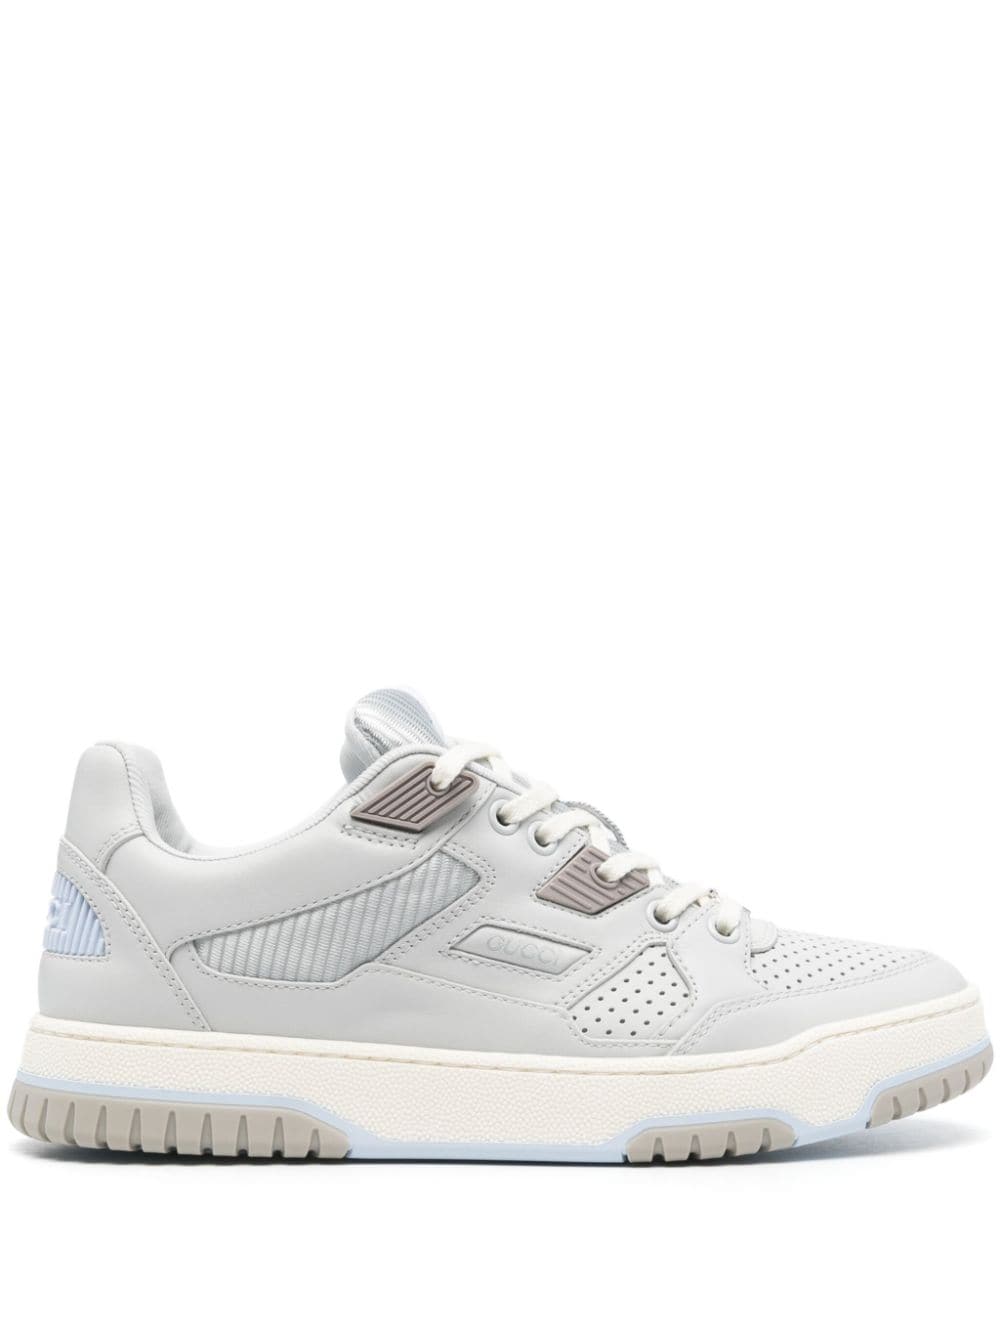 Image 1 of Gucci panelled low-top sneakers